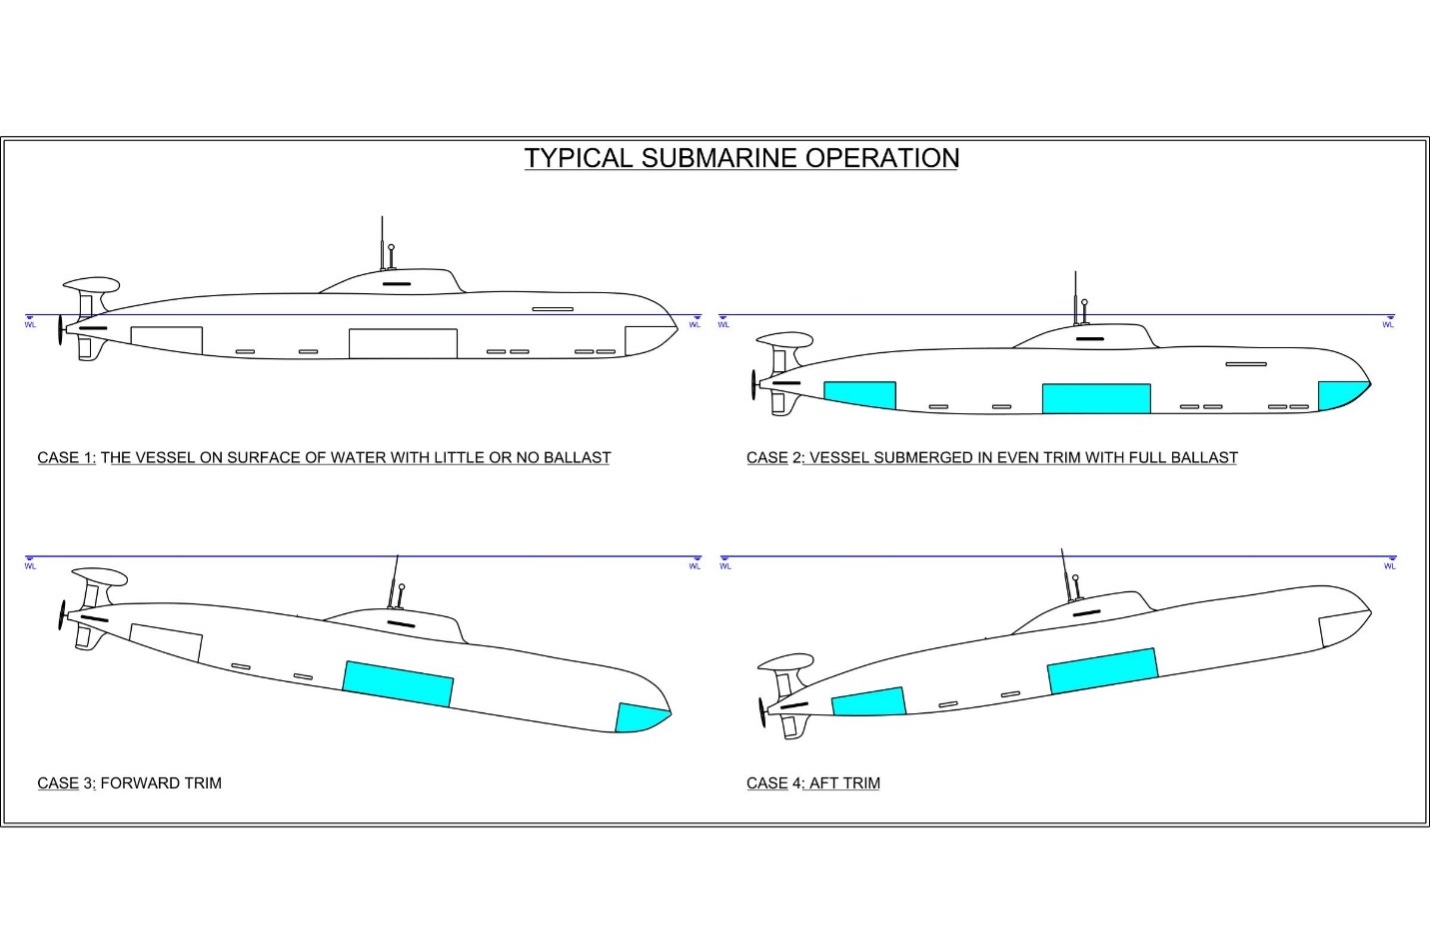 Typical Submarine Operations with a graphical explanation of what tanks are filled or emptied depending on desired trim.